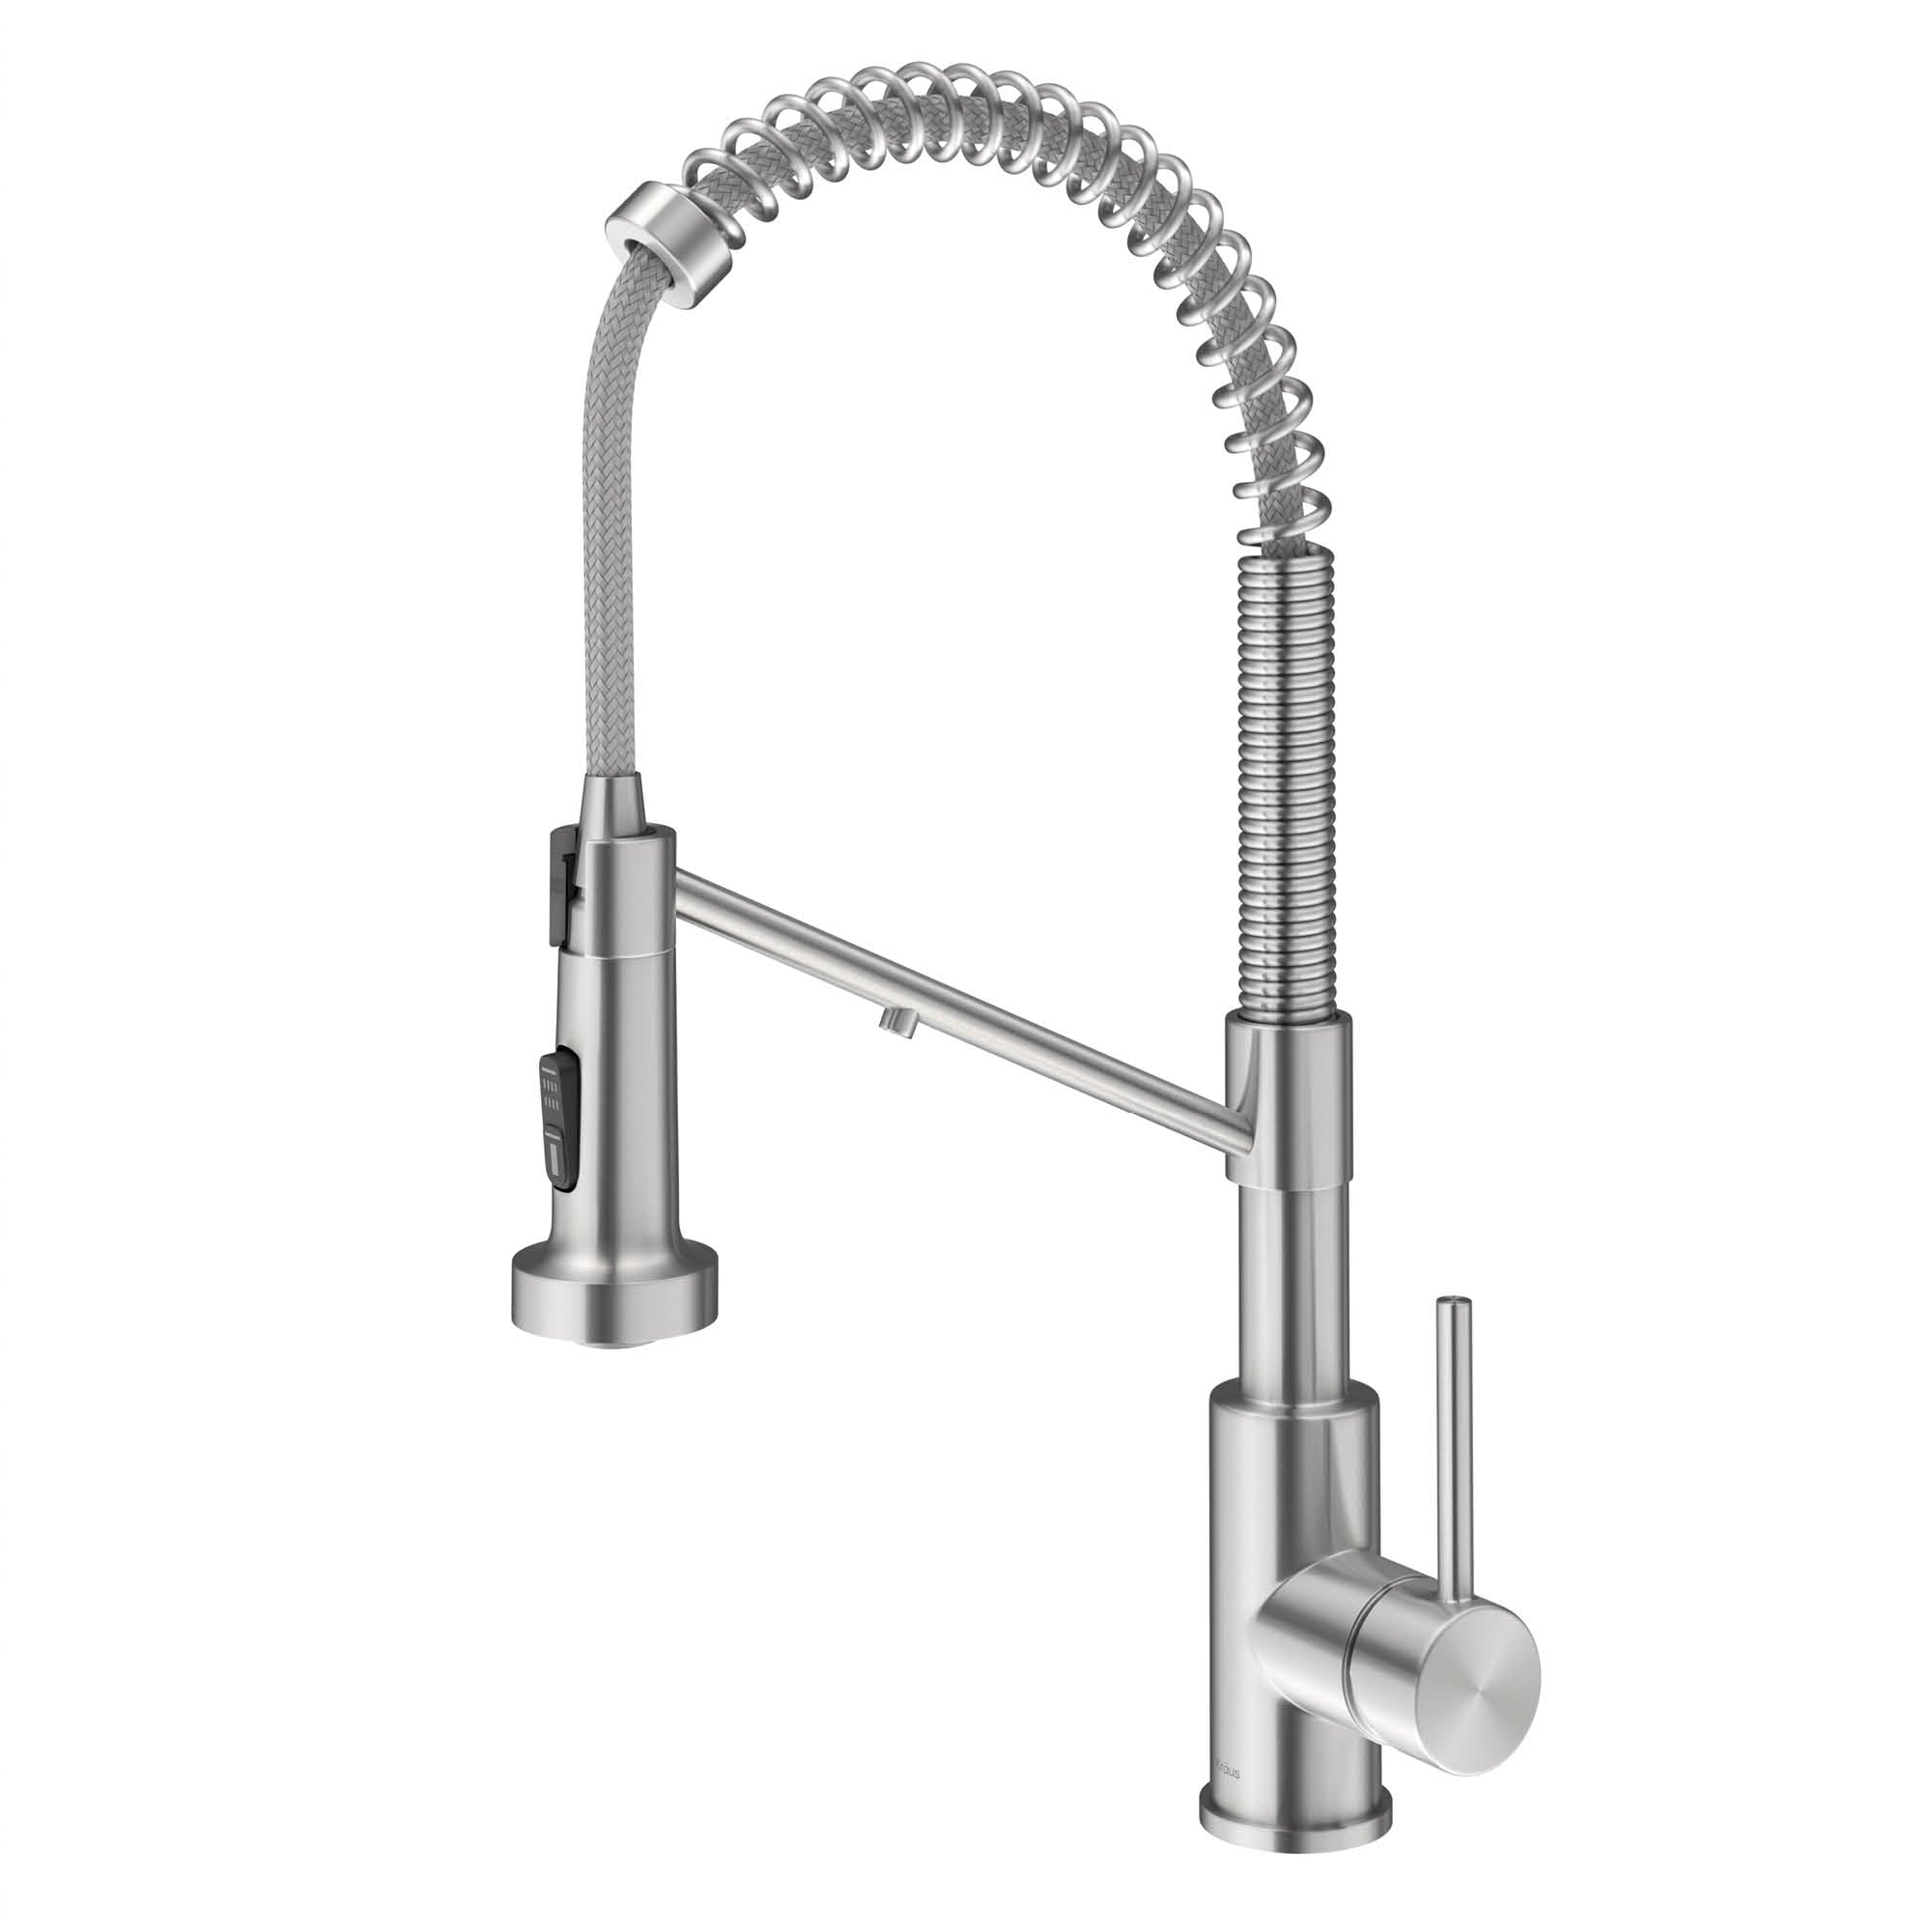 KRAUS Oletto Single Handle Drinking Water Filter Faucet for